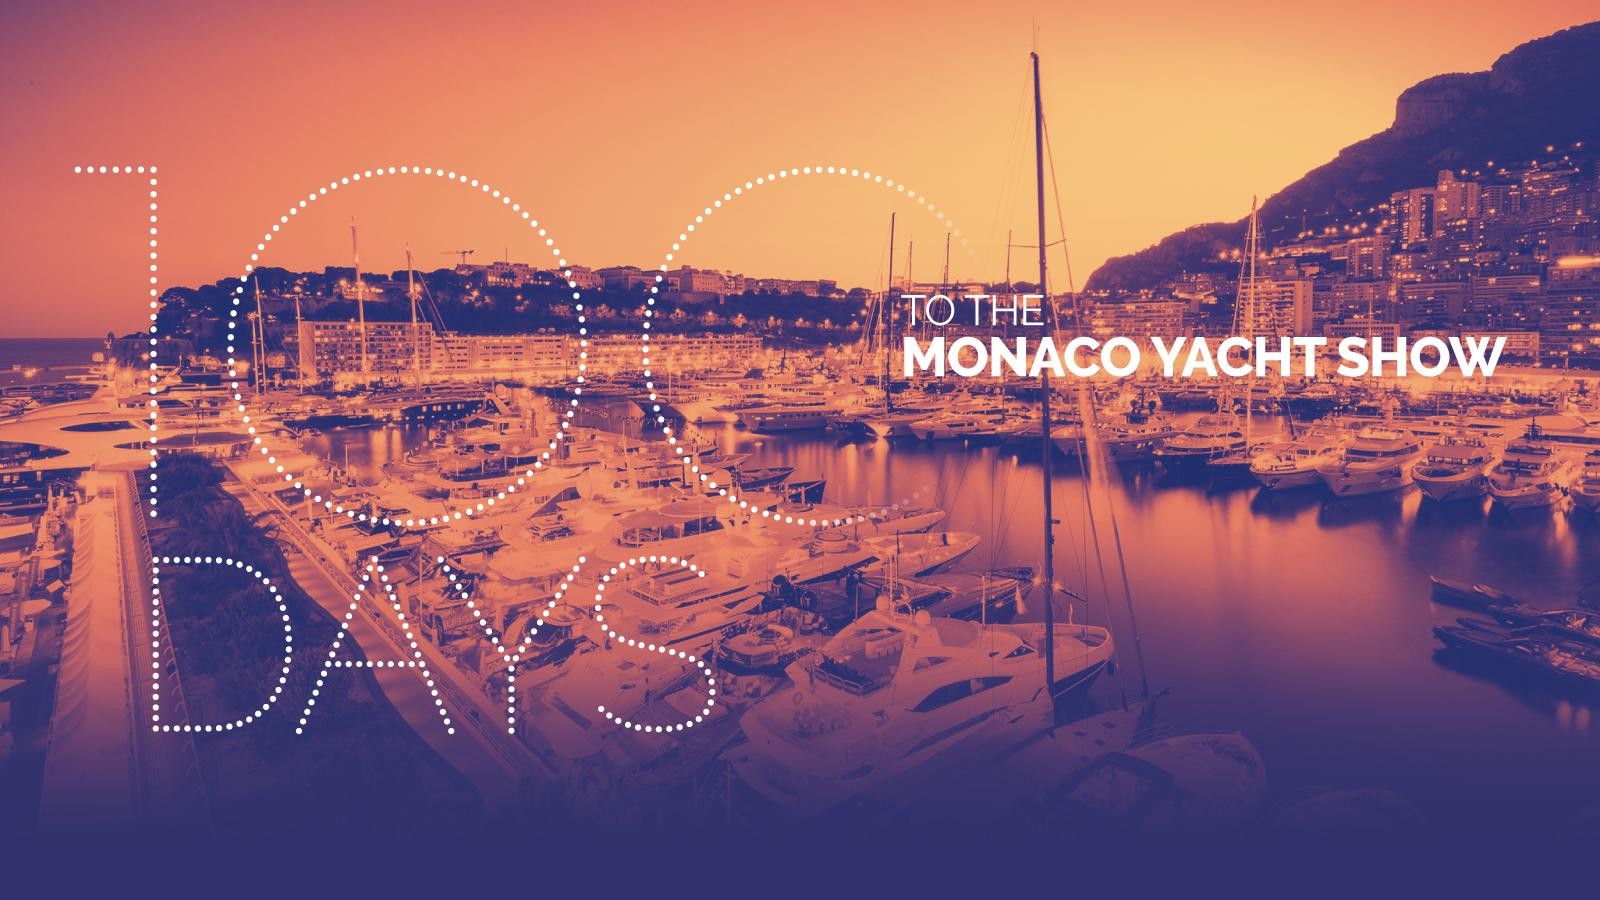 This Tuesday 25 June, the Monaco Yacht Show started its final countdown with a cocktail reception in the ephemeral garden of Monte Carlo.